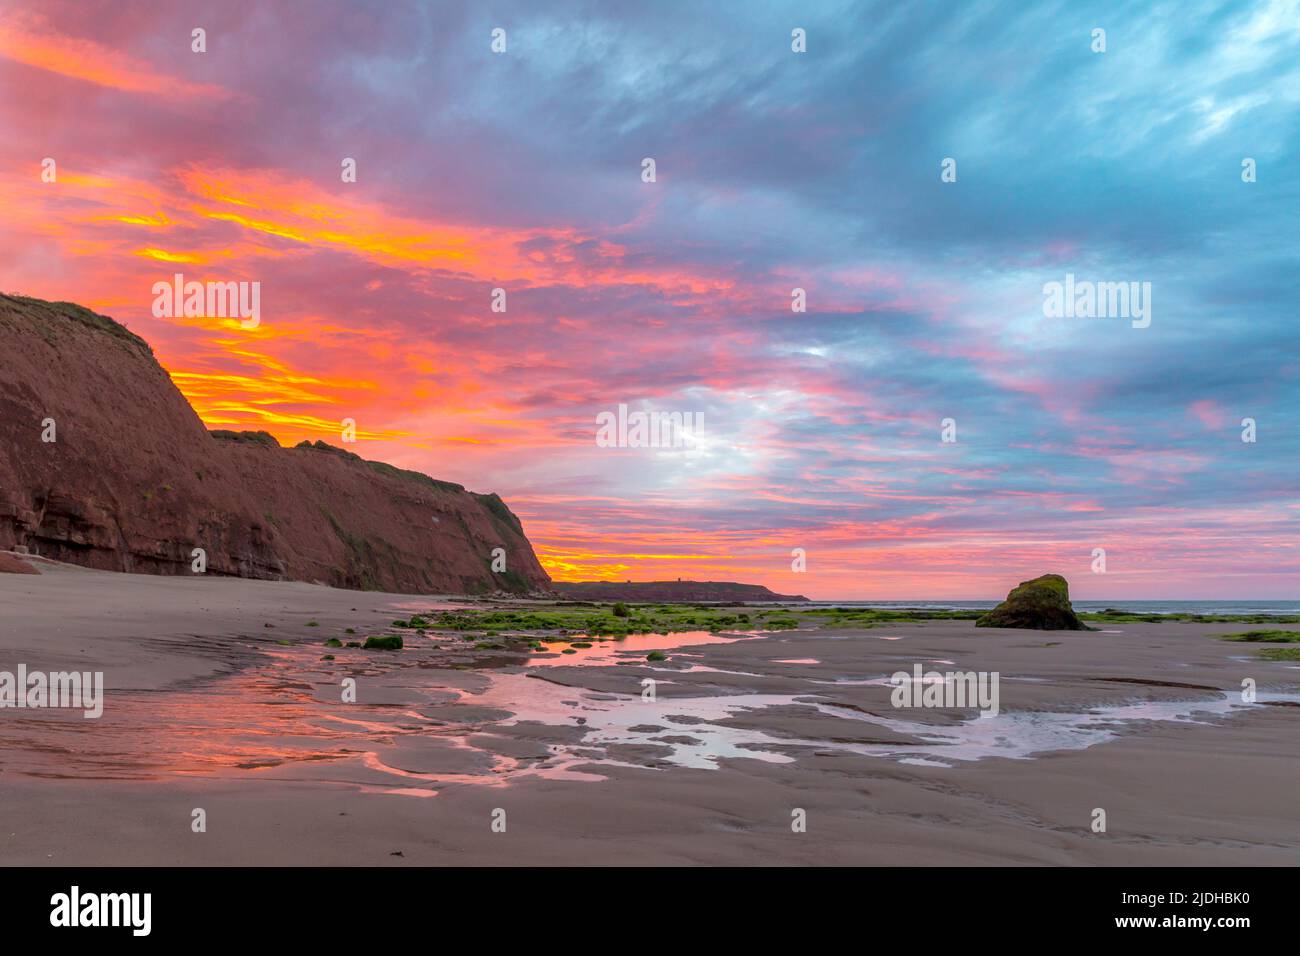 Sunrise over cliffs and beach at low tide, Orcombe Point, South Devon. Stock Photo